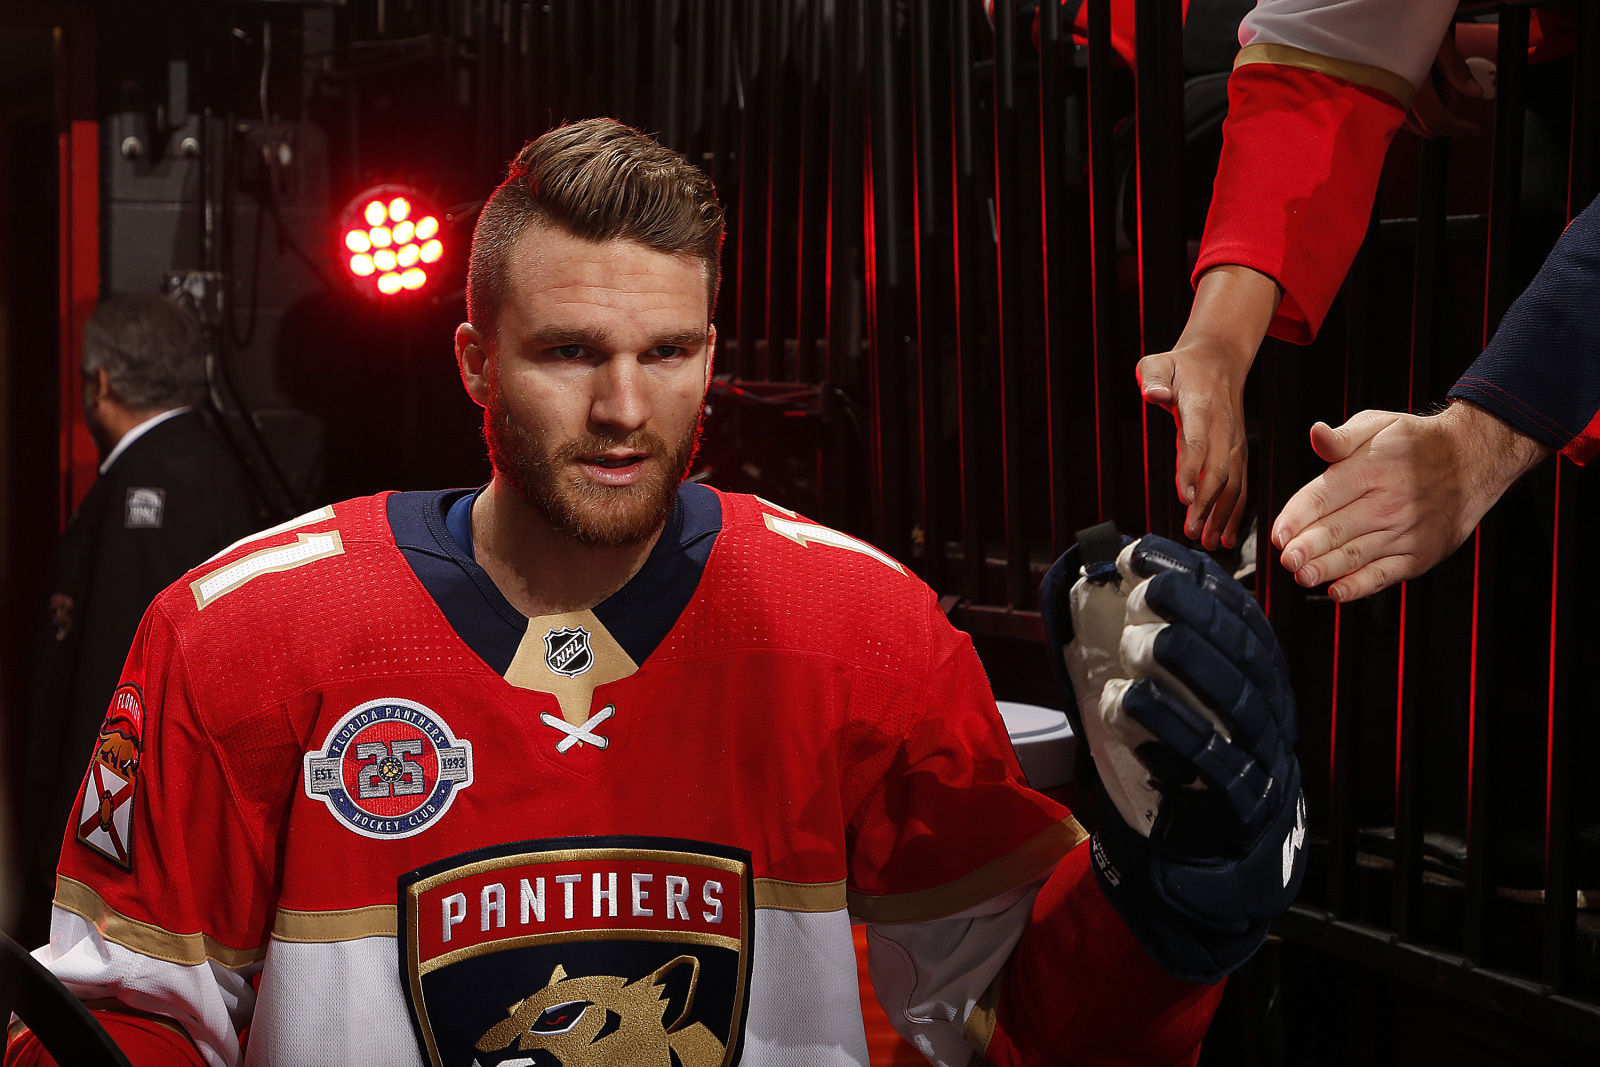 Florida Panthers: Under No Circumstance Should Huberdeau Be Traded